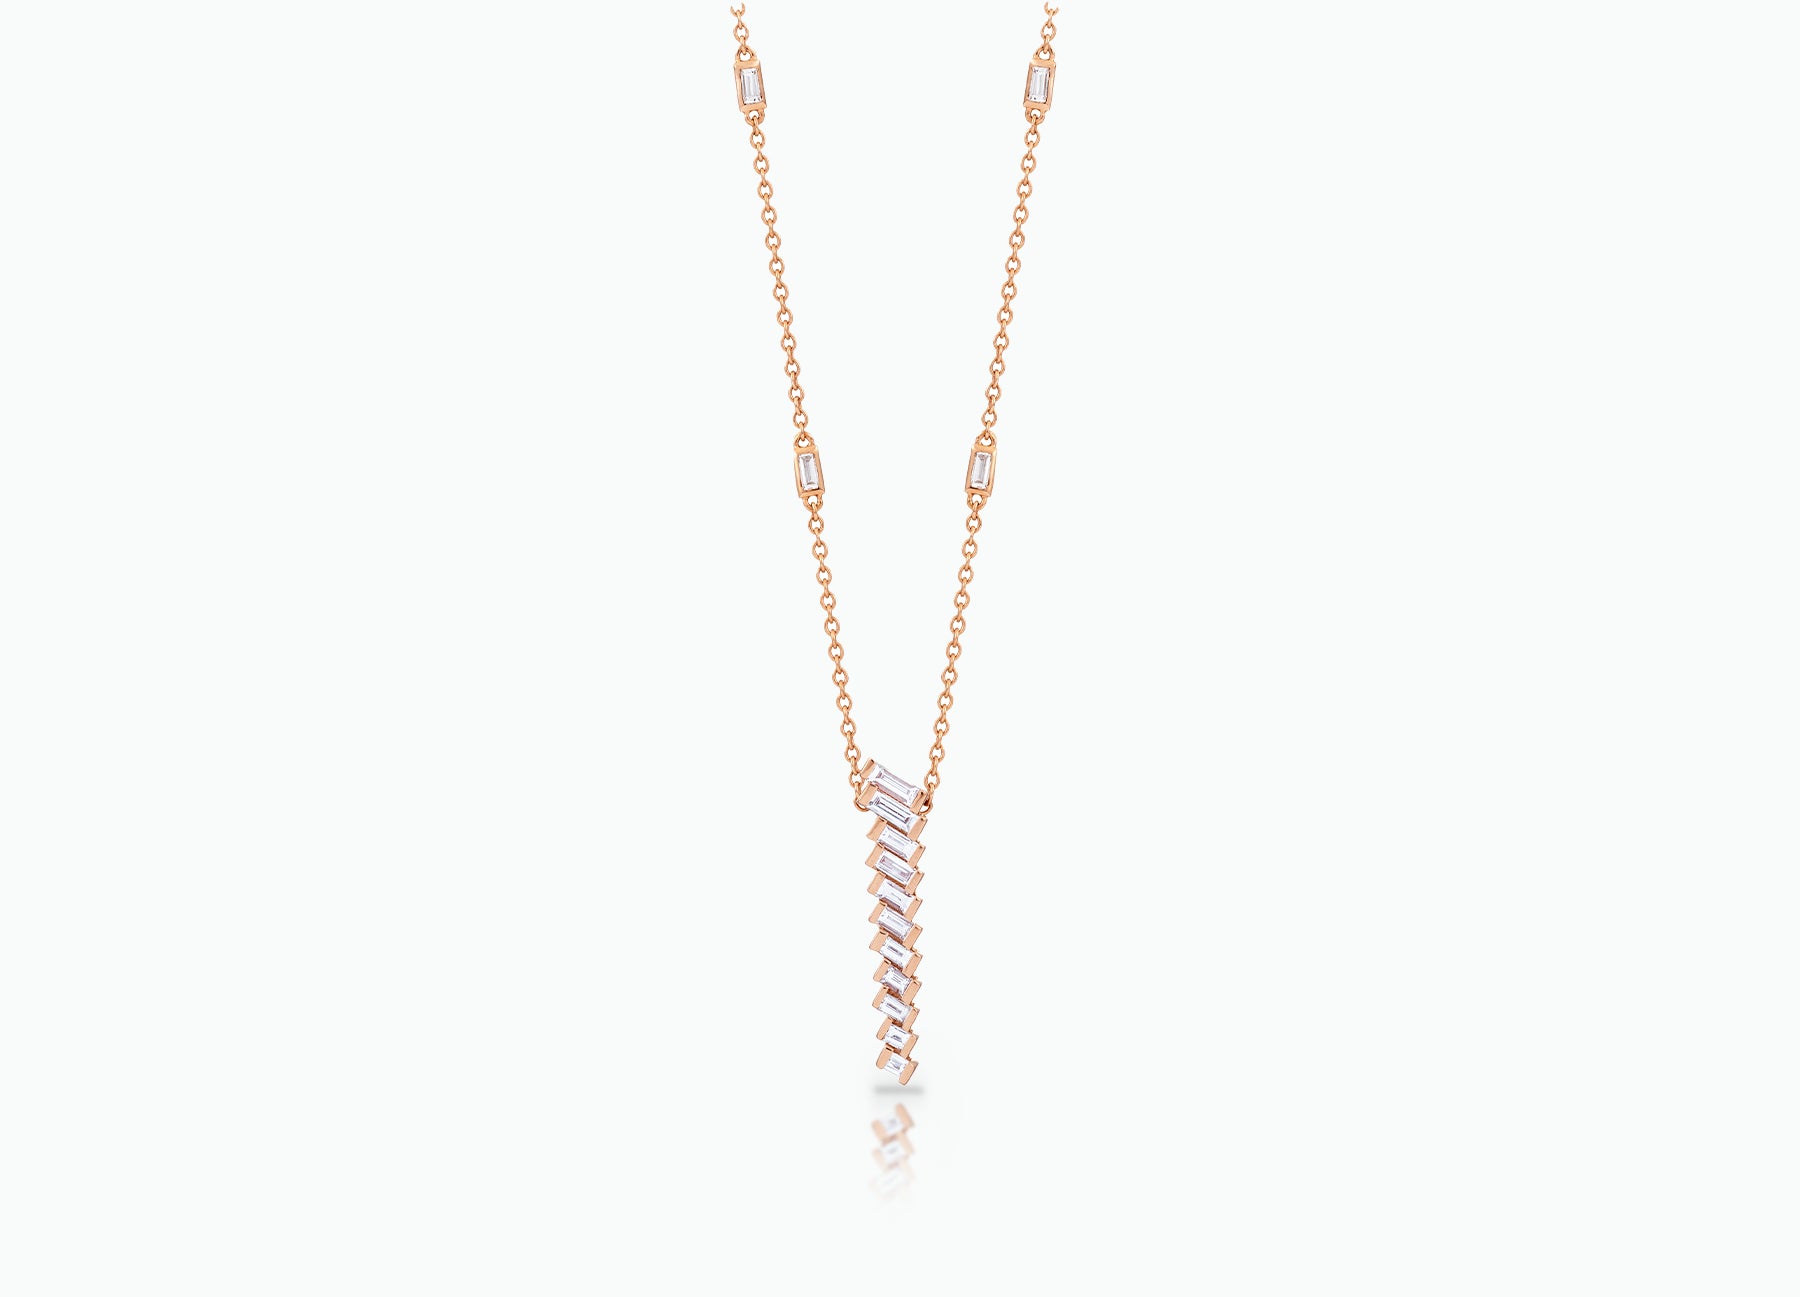 Pendant with baguette white Diamonds that create a chevron pattern. Made from rose, yellow or white 18k Gold.  Total carat weight 0.70ct.